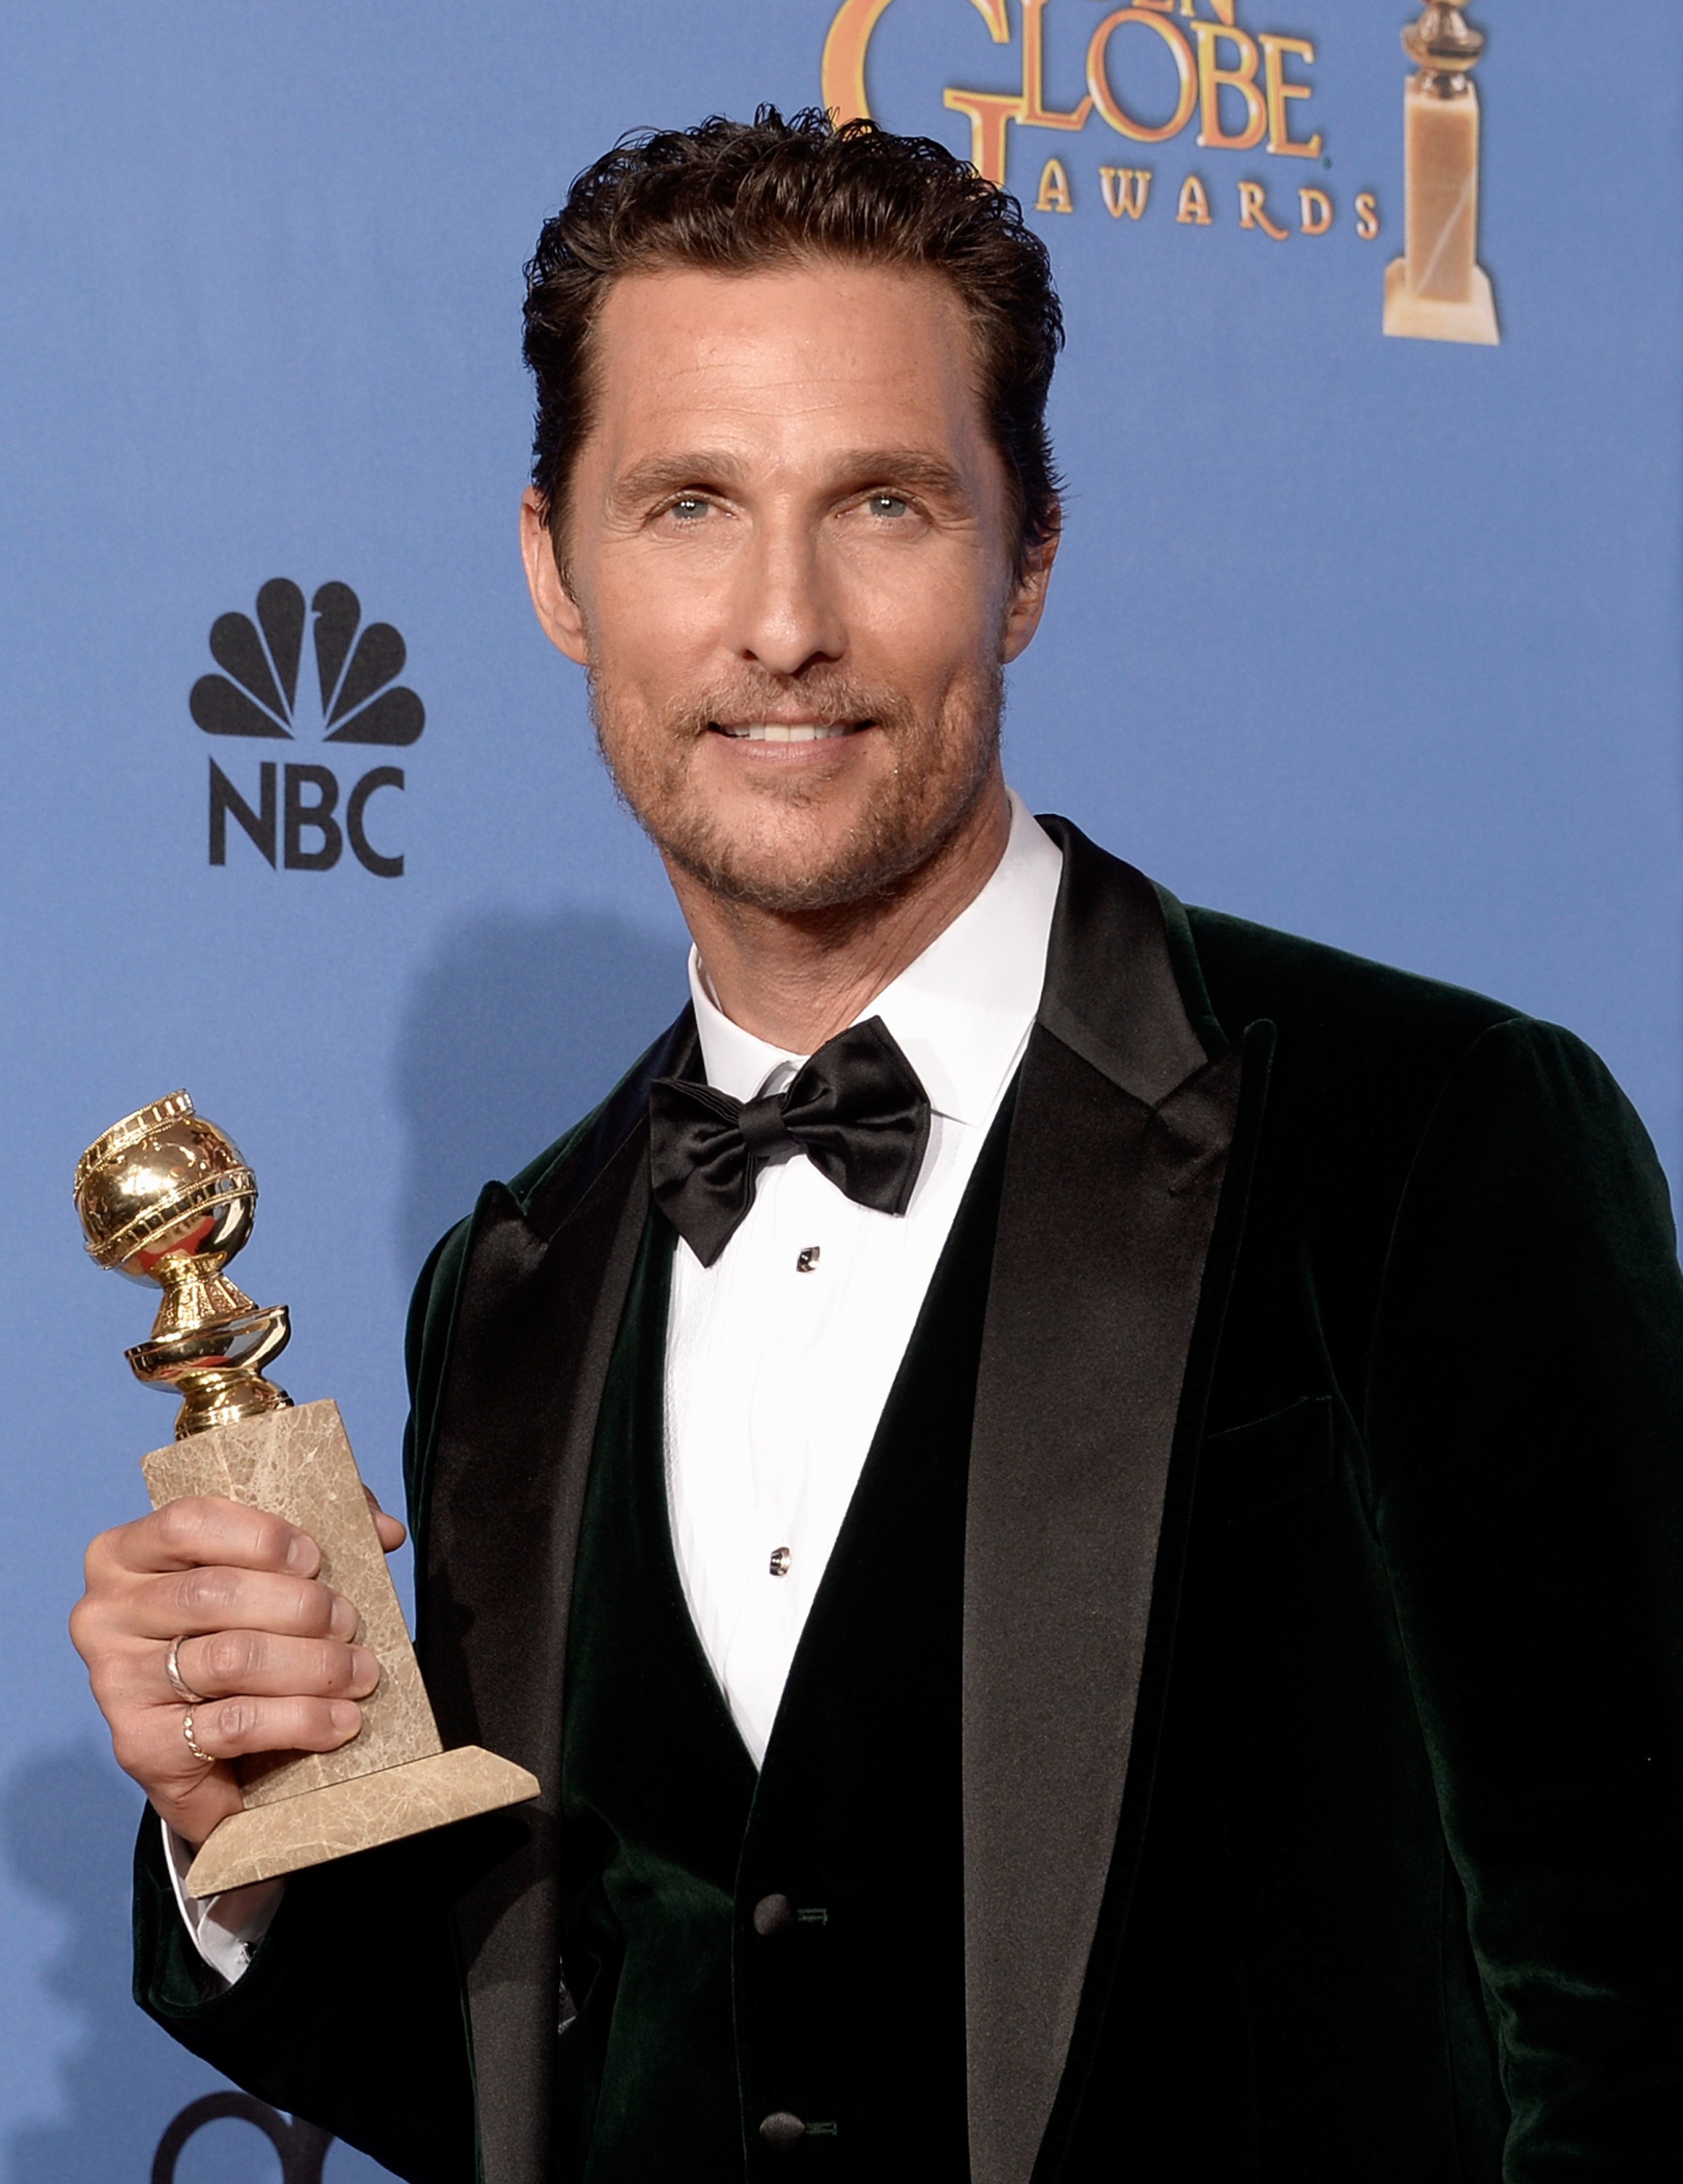 Actor Matthew McConaughey wins the 2014 Golden Globe Awards for Best Actor for "Dallas Buyers Club." | Photo: Getty Images